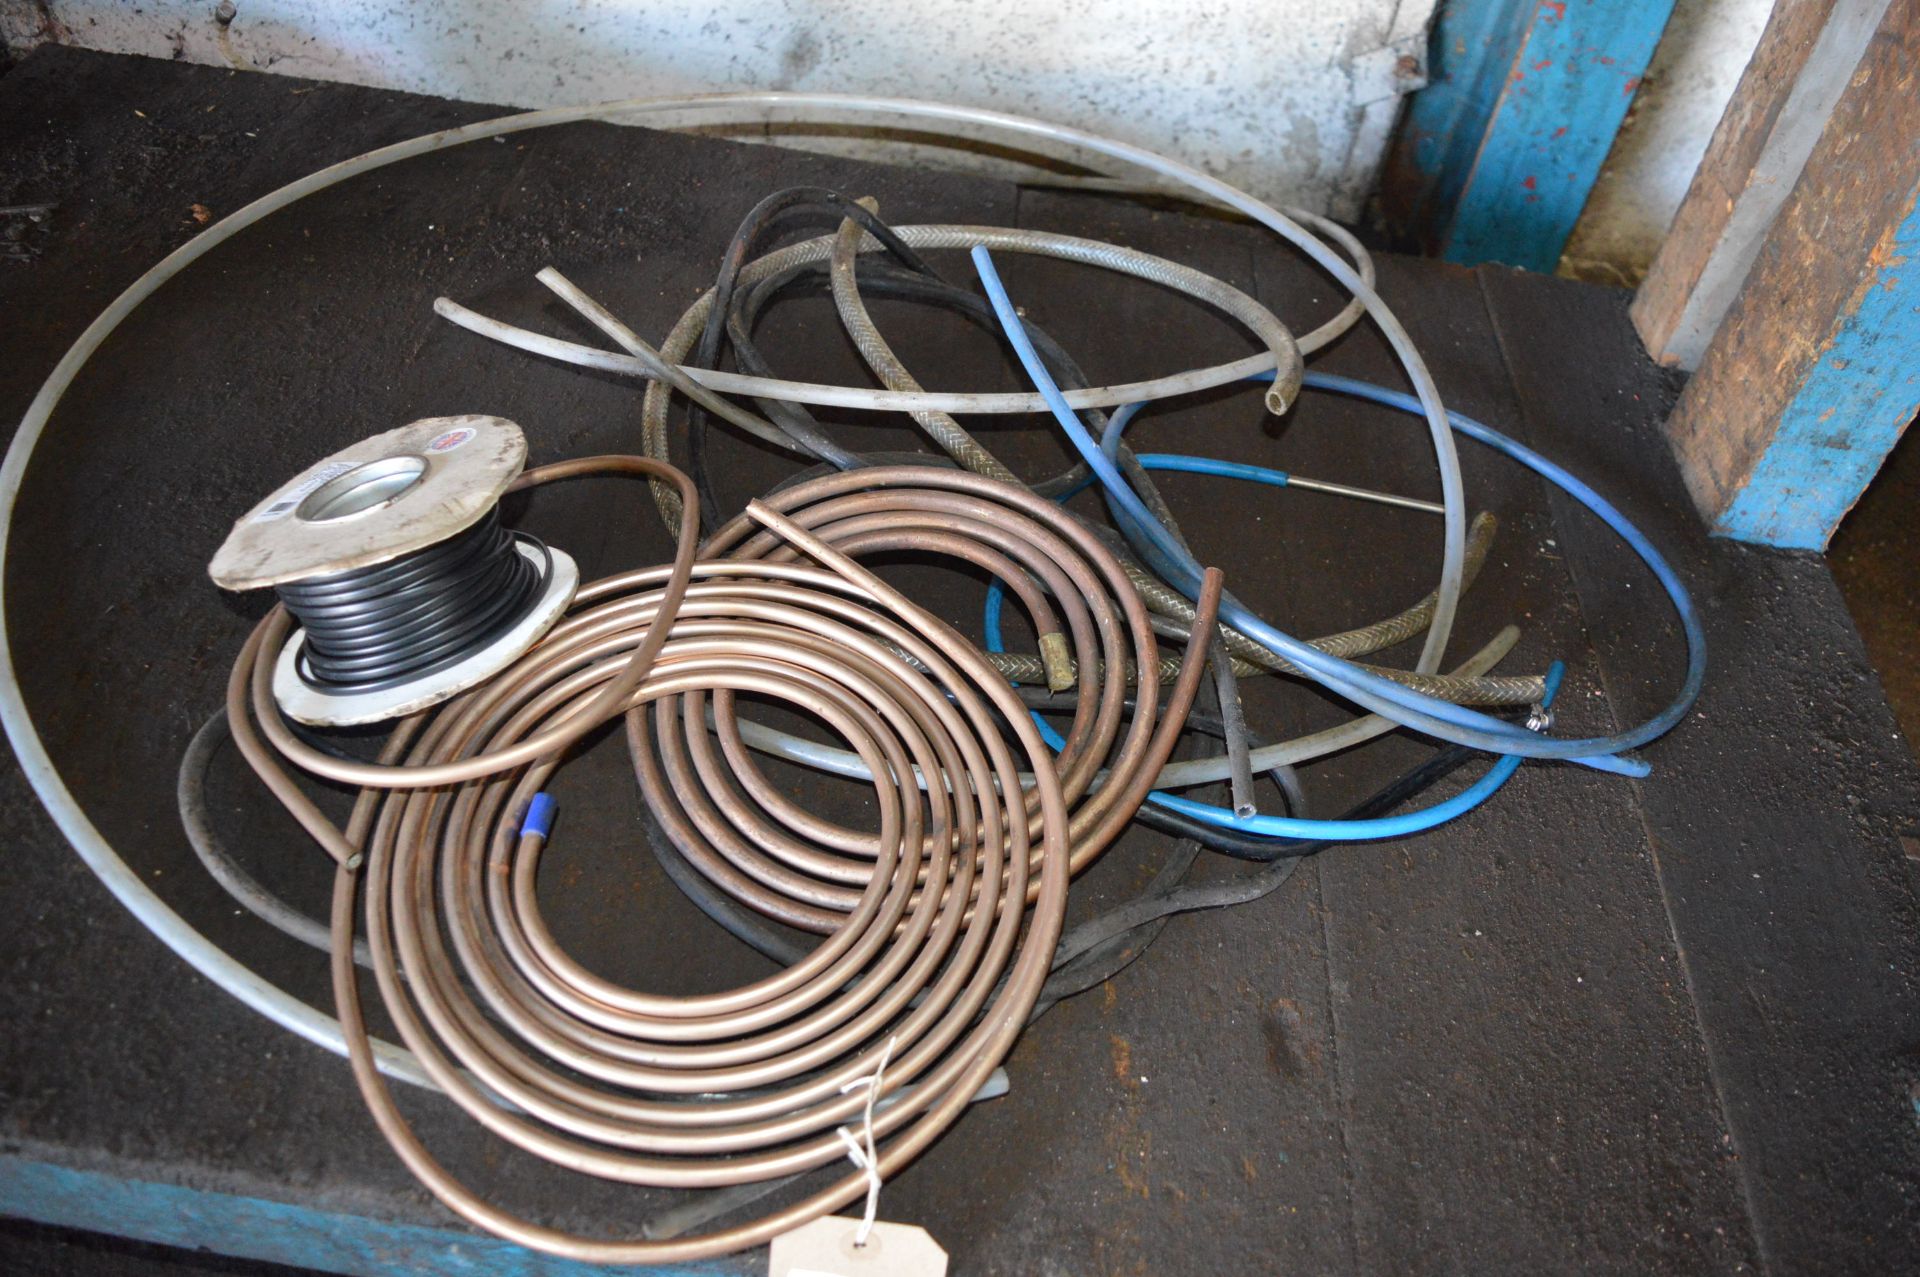 Roll of Copper Fuel Pipe, Airpipe Offcuts, and Part Reel of Two Core Cable